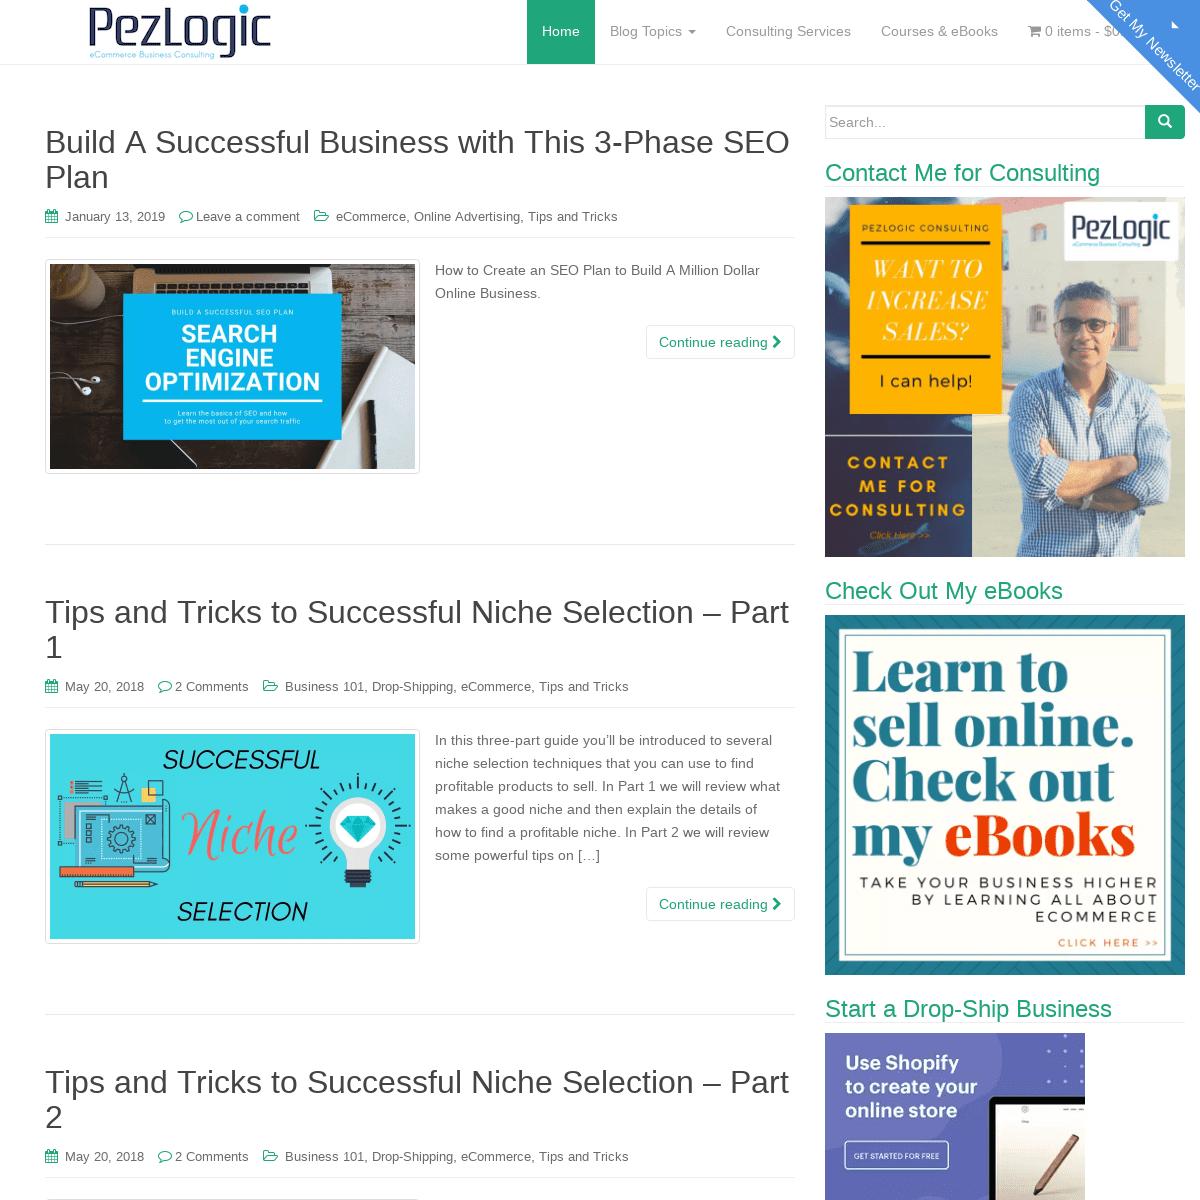 Pezlogic - Your inside scoop on running an ecommerce business